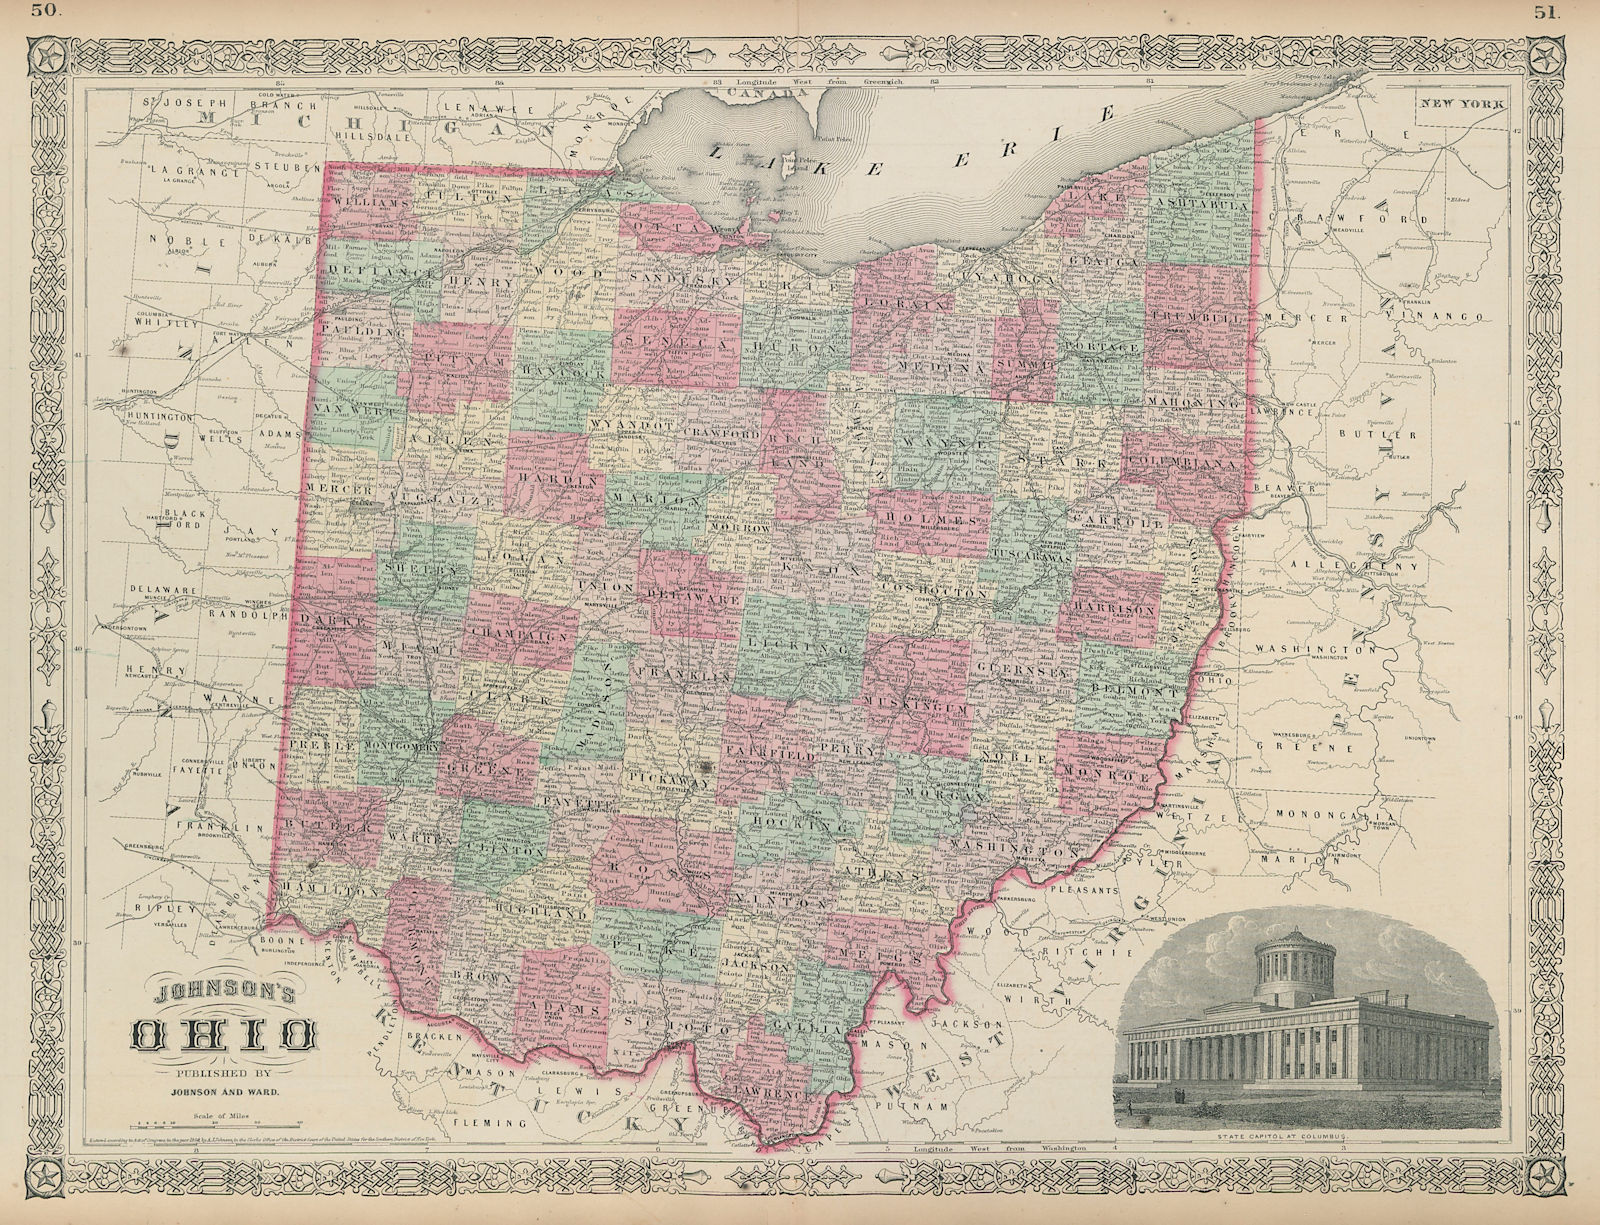 Johnson's Ohio. US state map showing counties 1865 old antique plan chart